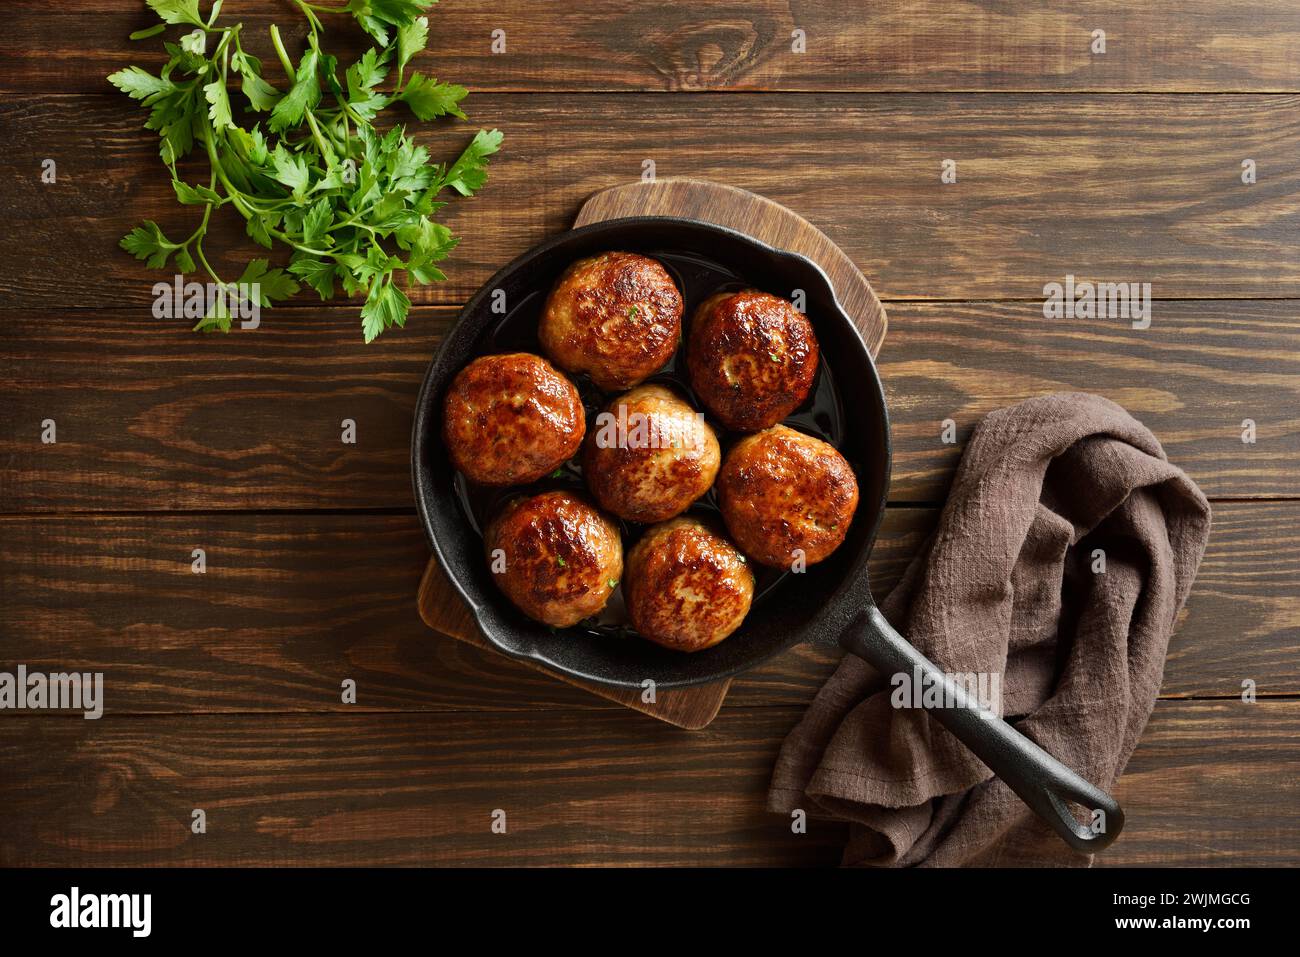 Minced pork and beef cutlets in cast iron skillet over wooden background. Top view, flat lay Stock Photo